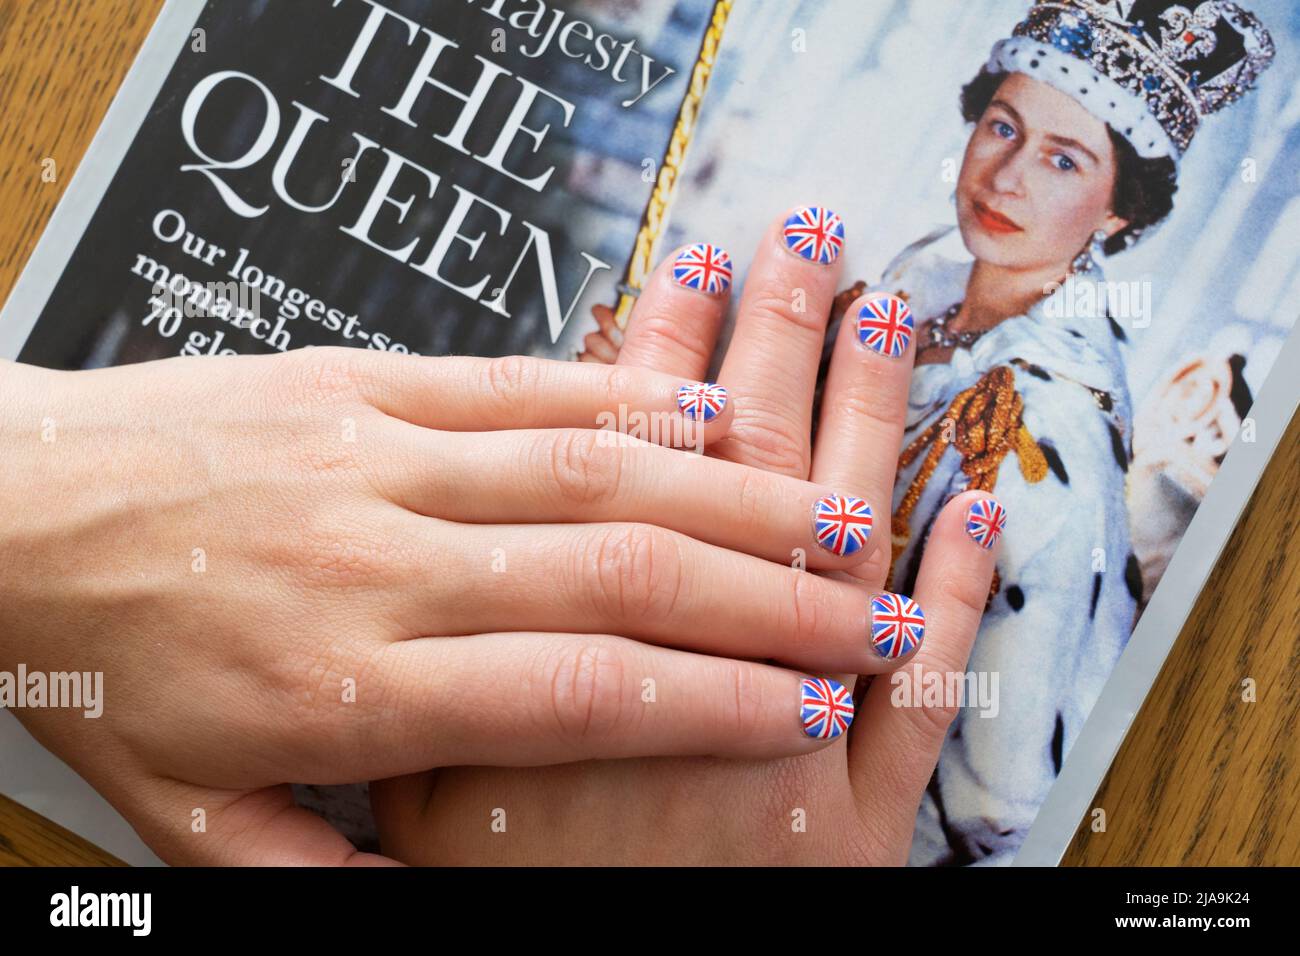 Meghan Markle's twist on the royal manicure: How to get her look - ABC News